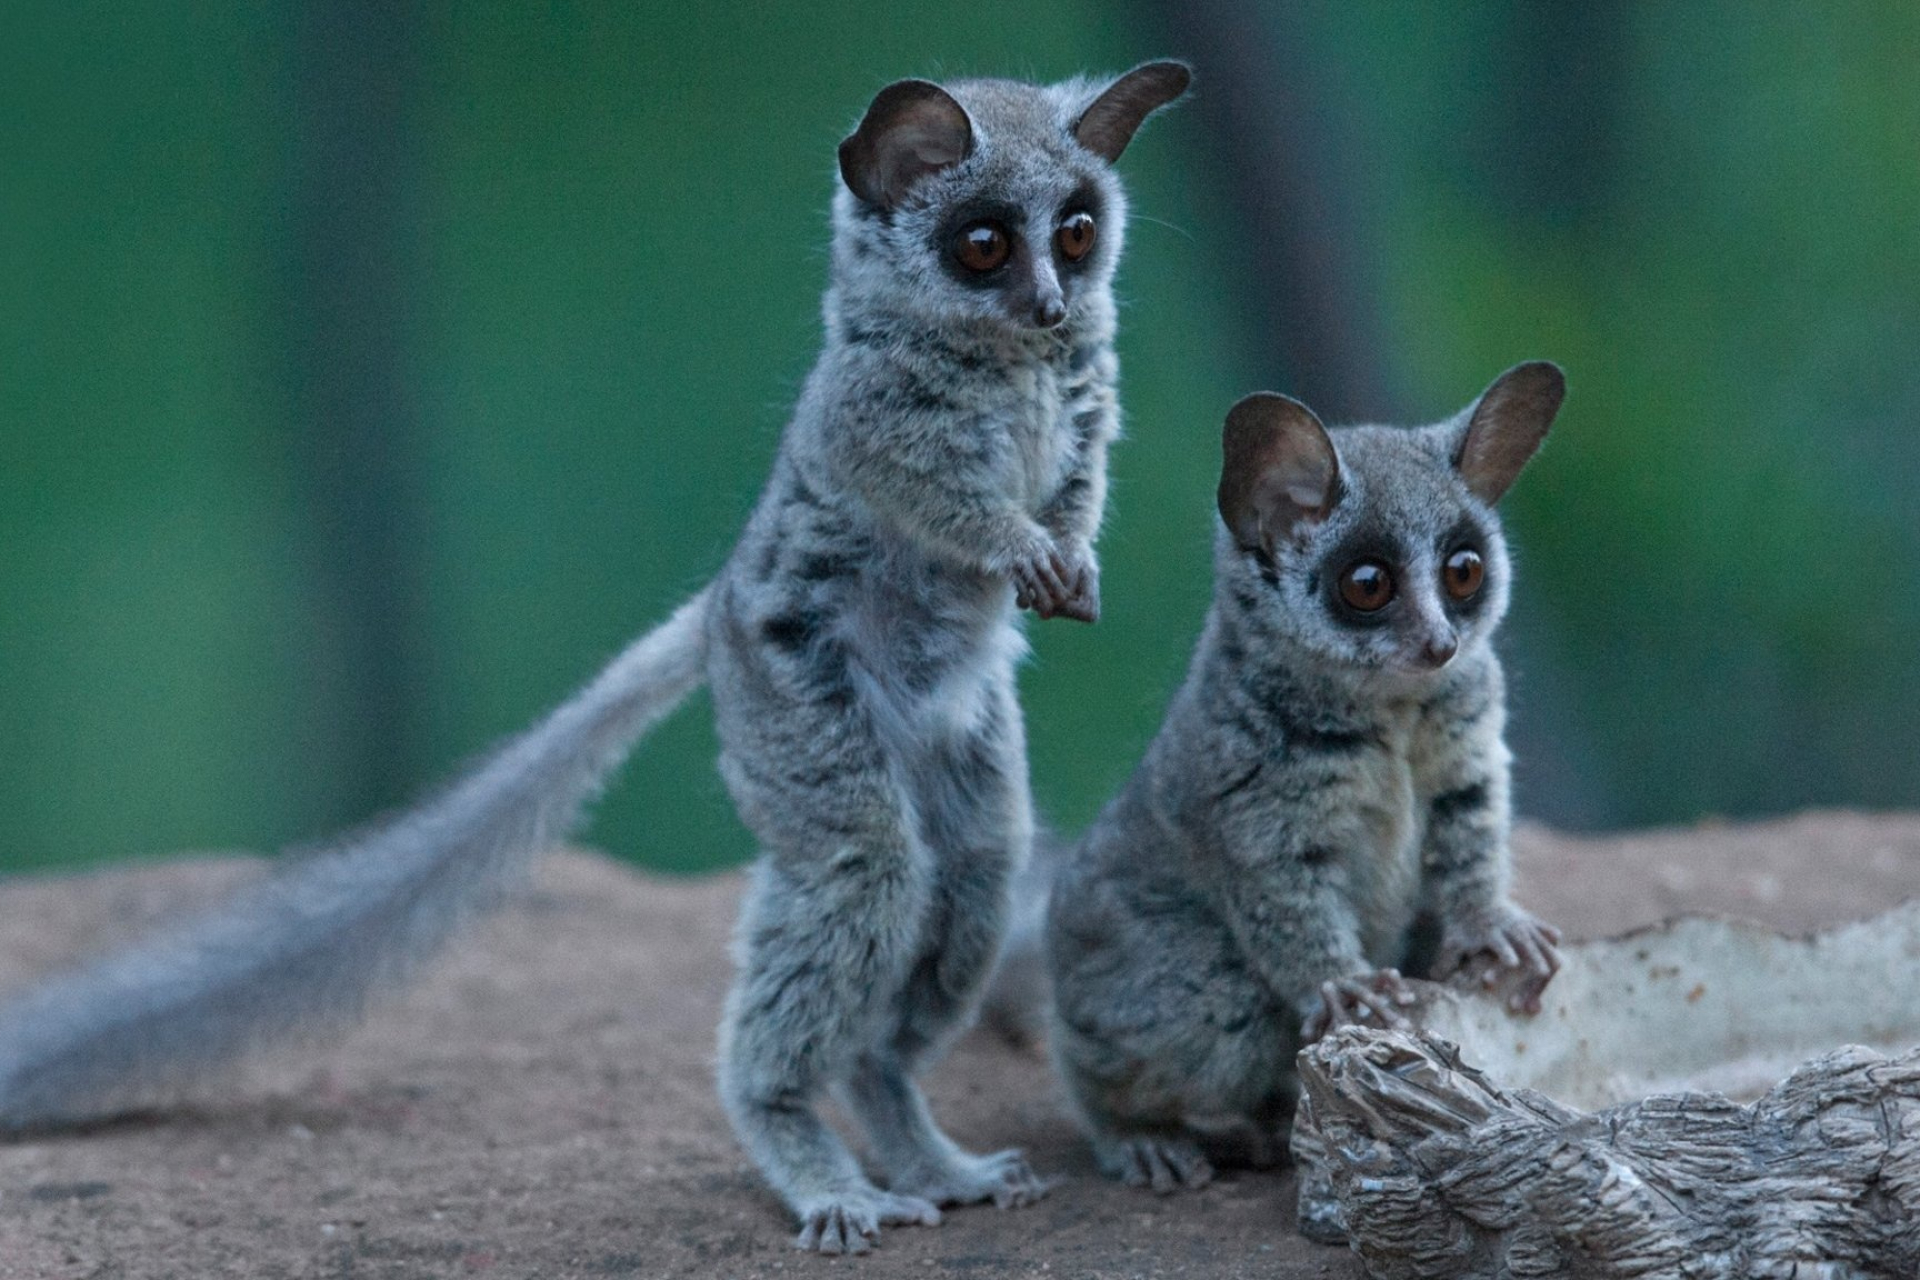 Bush Baby (Galago), Adorable primate, Silent and agile, Africa Geographic, 1920x1280 HD Desktop